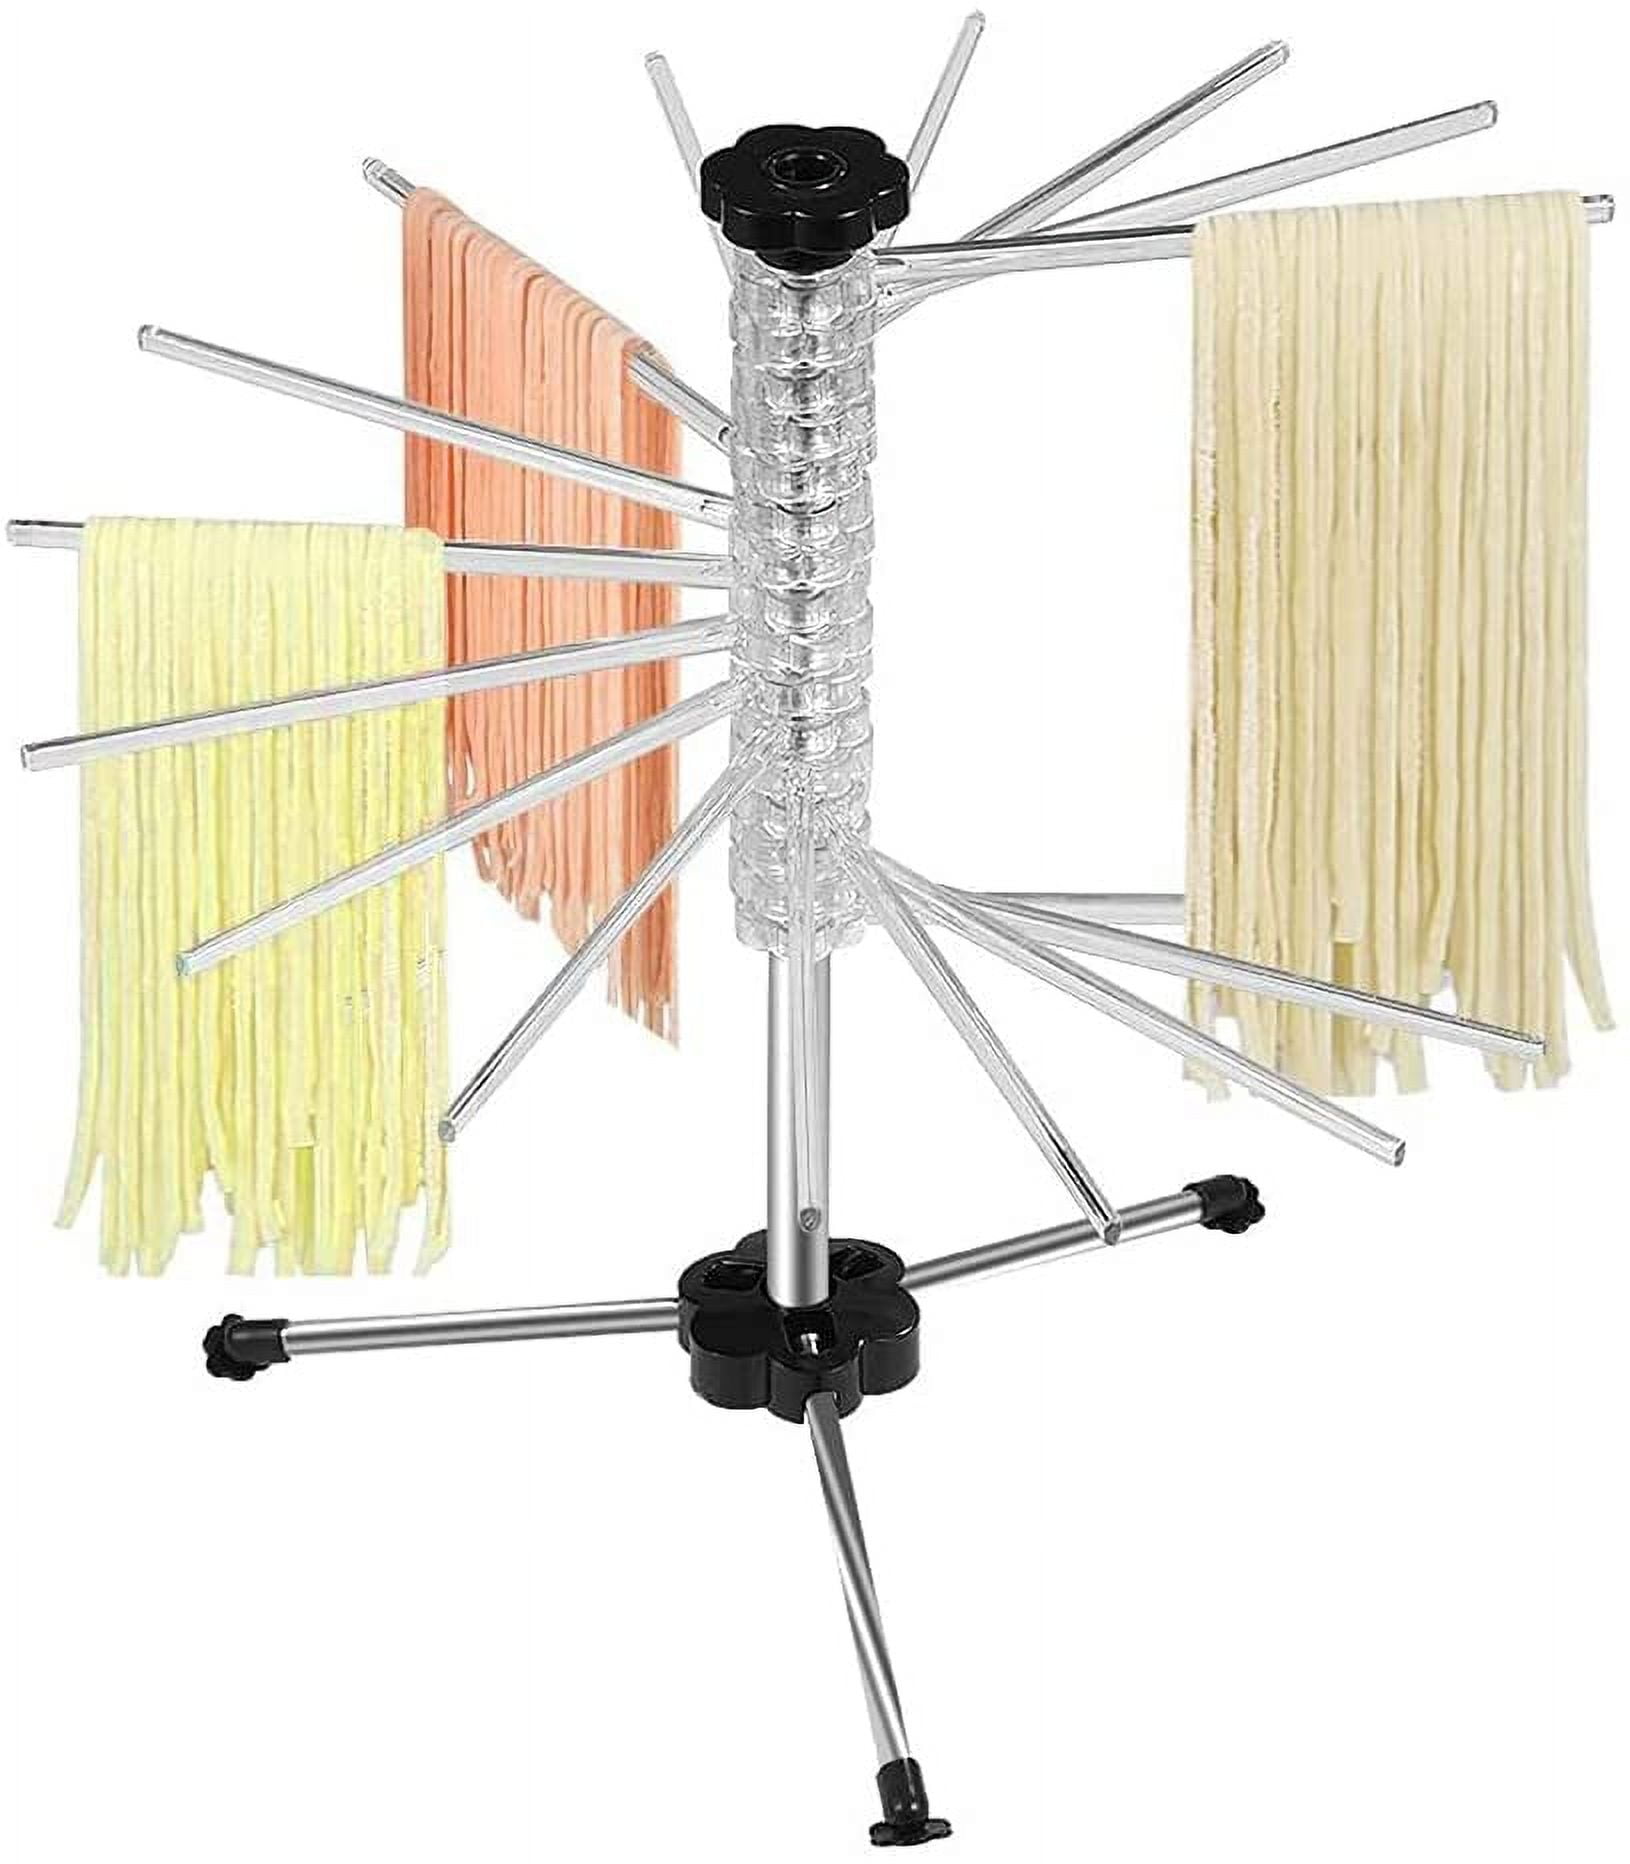 GOURMEO Collapsible Drying Rack for Fresh Pasta & Spaghetti Noodles, Black, Size: One Size